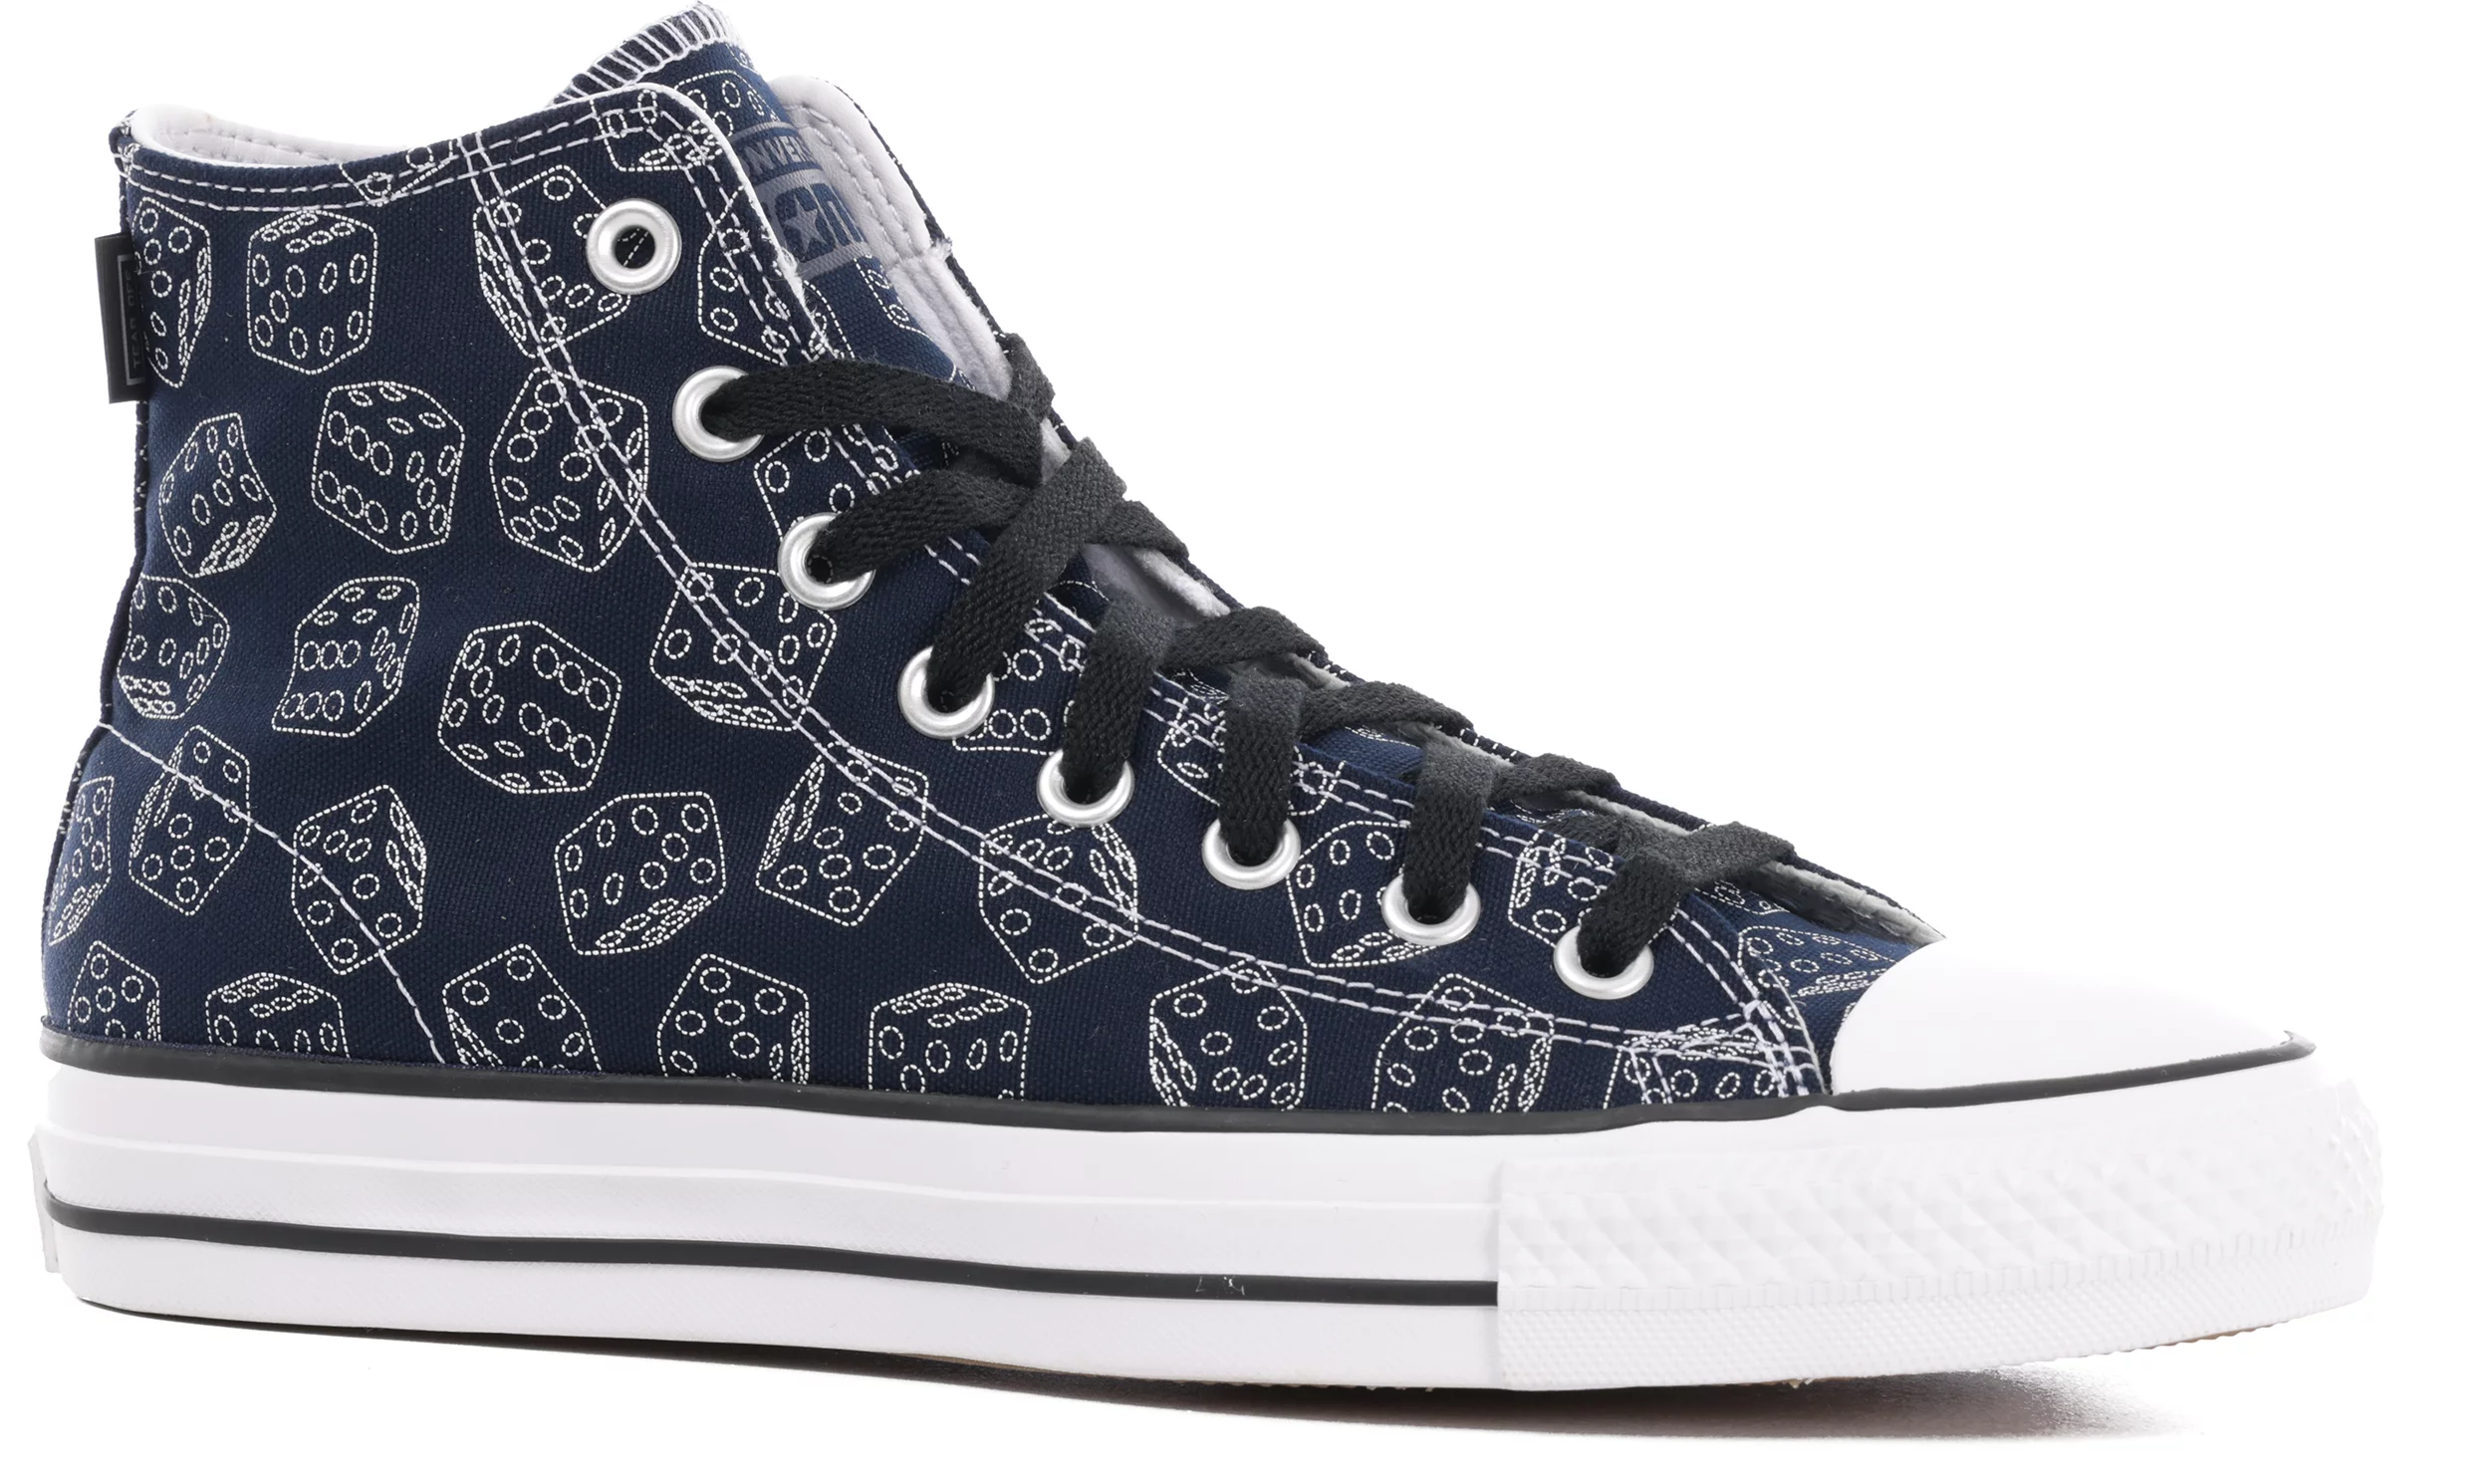 Converse Chuck Taylor All Star Pro High Skate Shoes - (dice print) obsidian/ black/white | Tactics